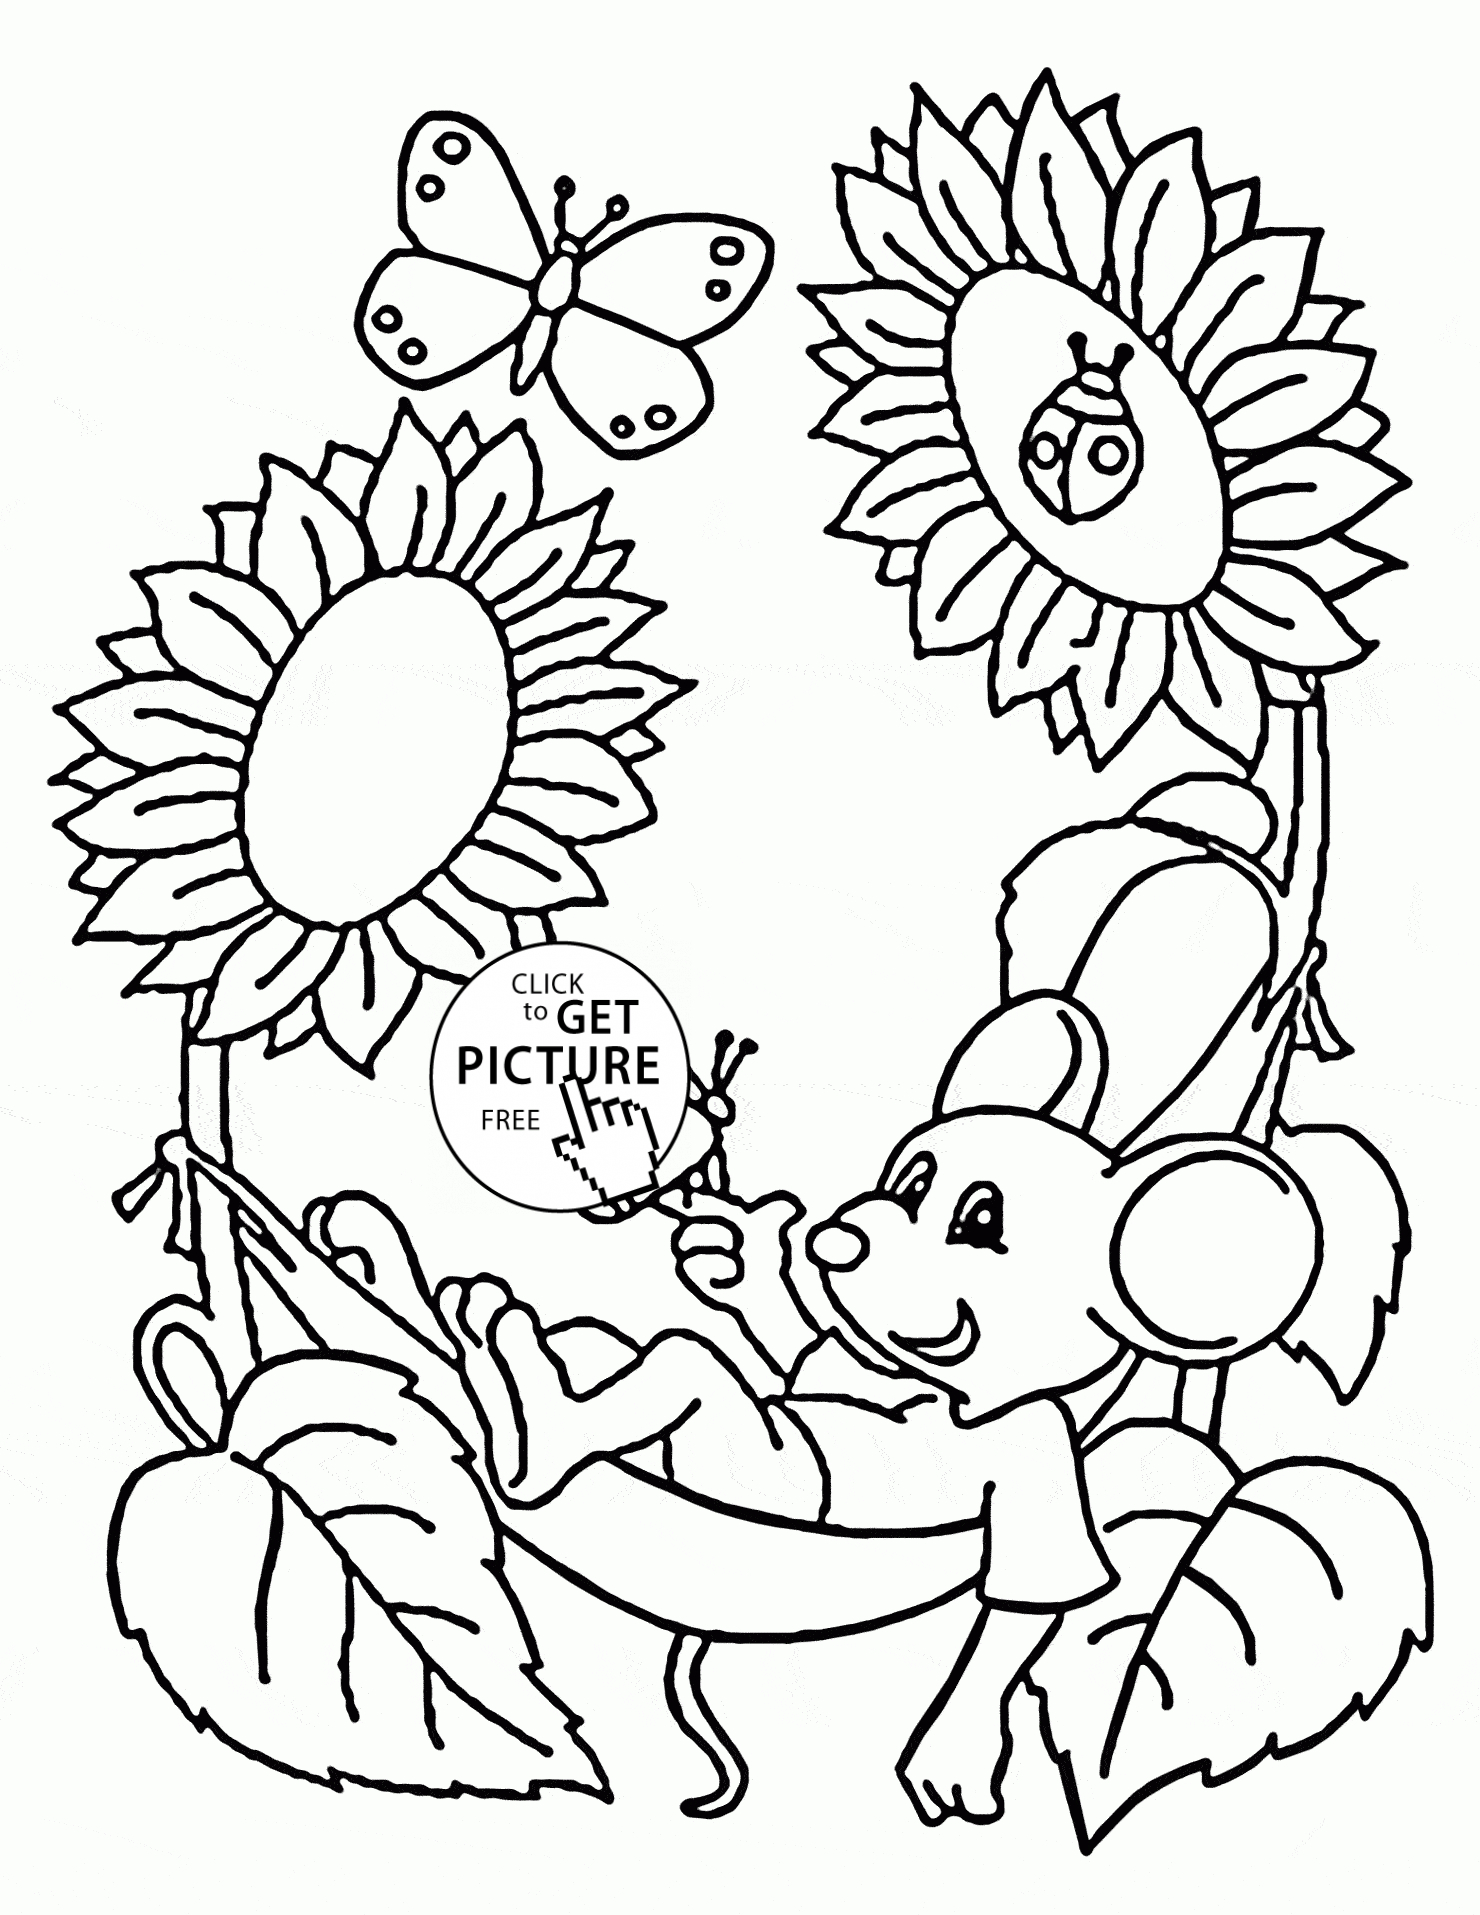 Spring Coloring Pages Coloring Pages Cute Mouse Andring Coloring Page For Kids Seasons